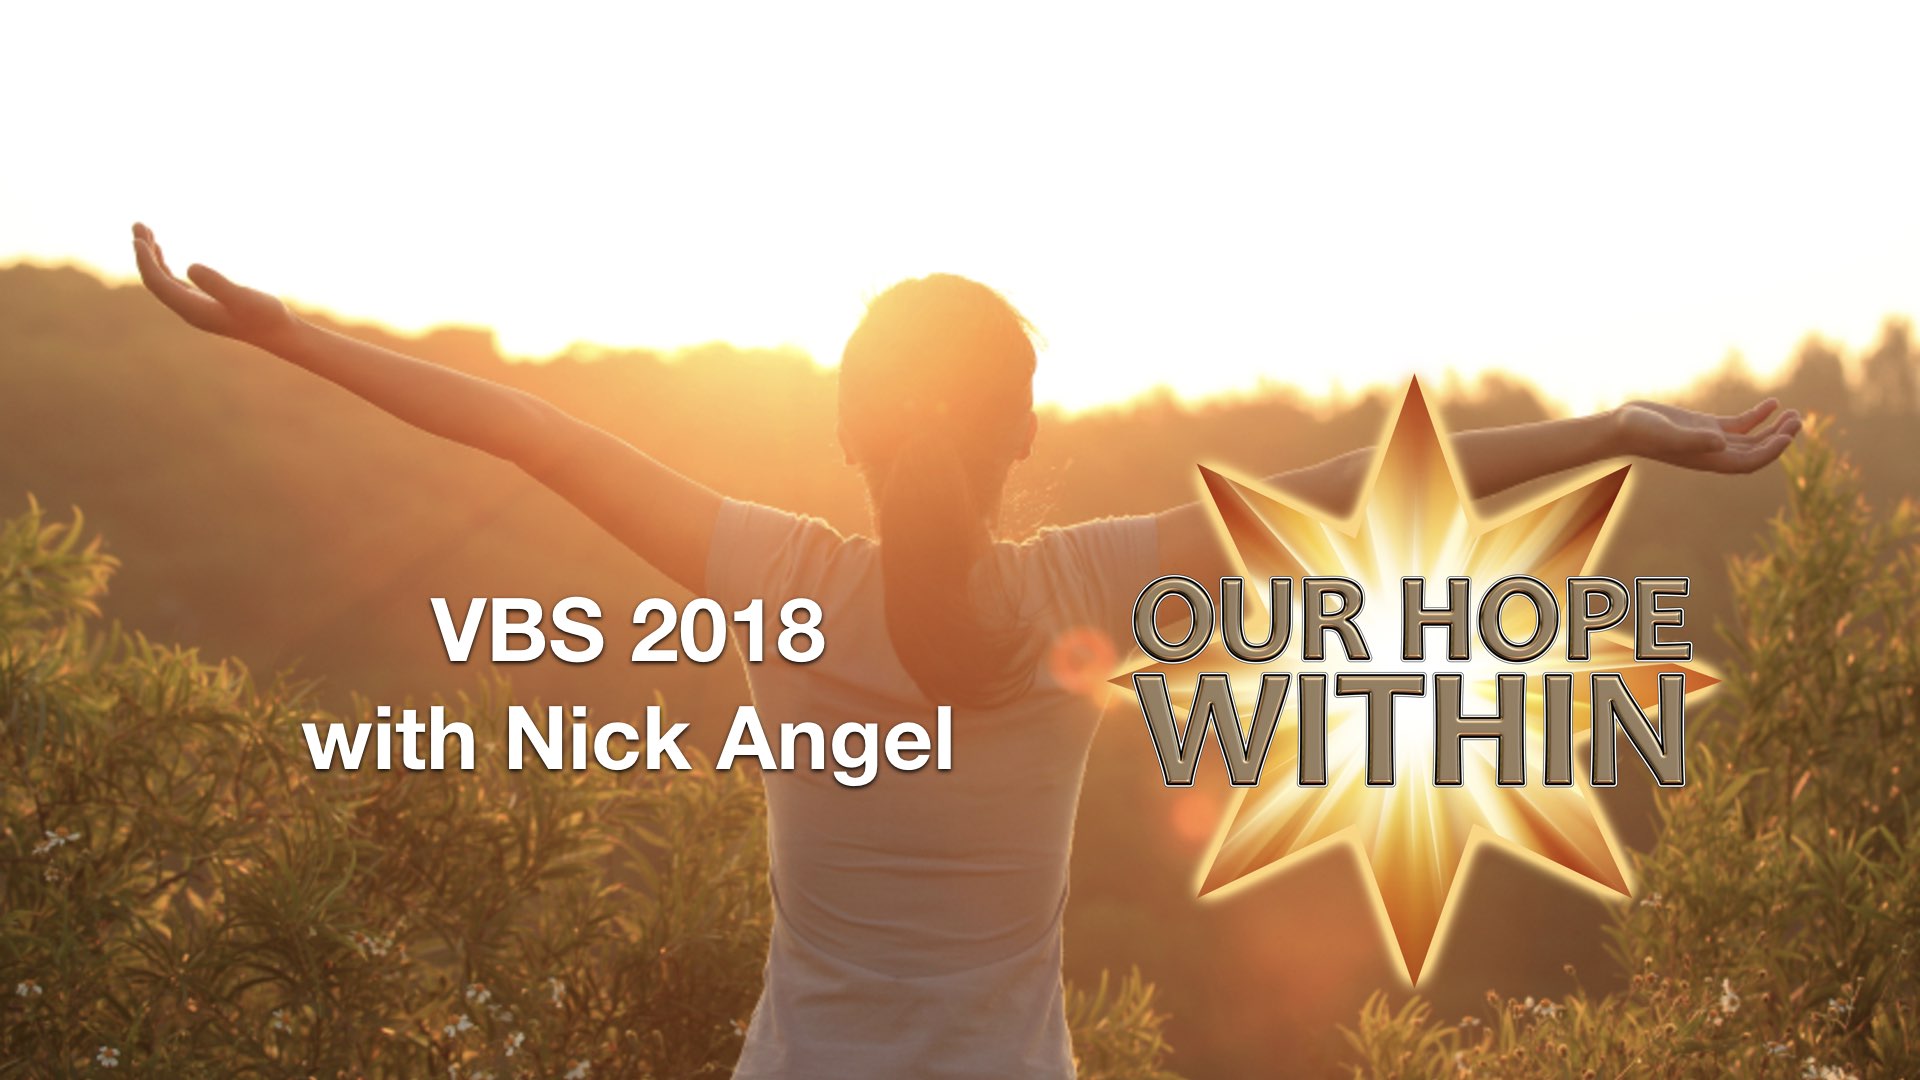 Our Hope Within – VBS 2018 with Nick Angel